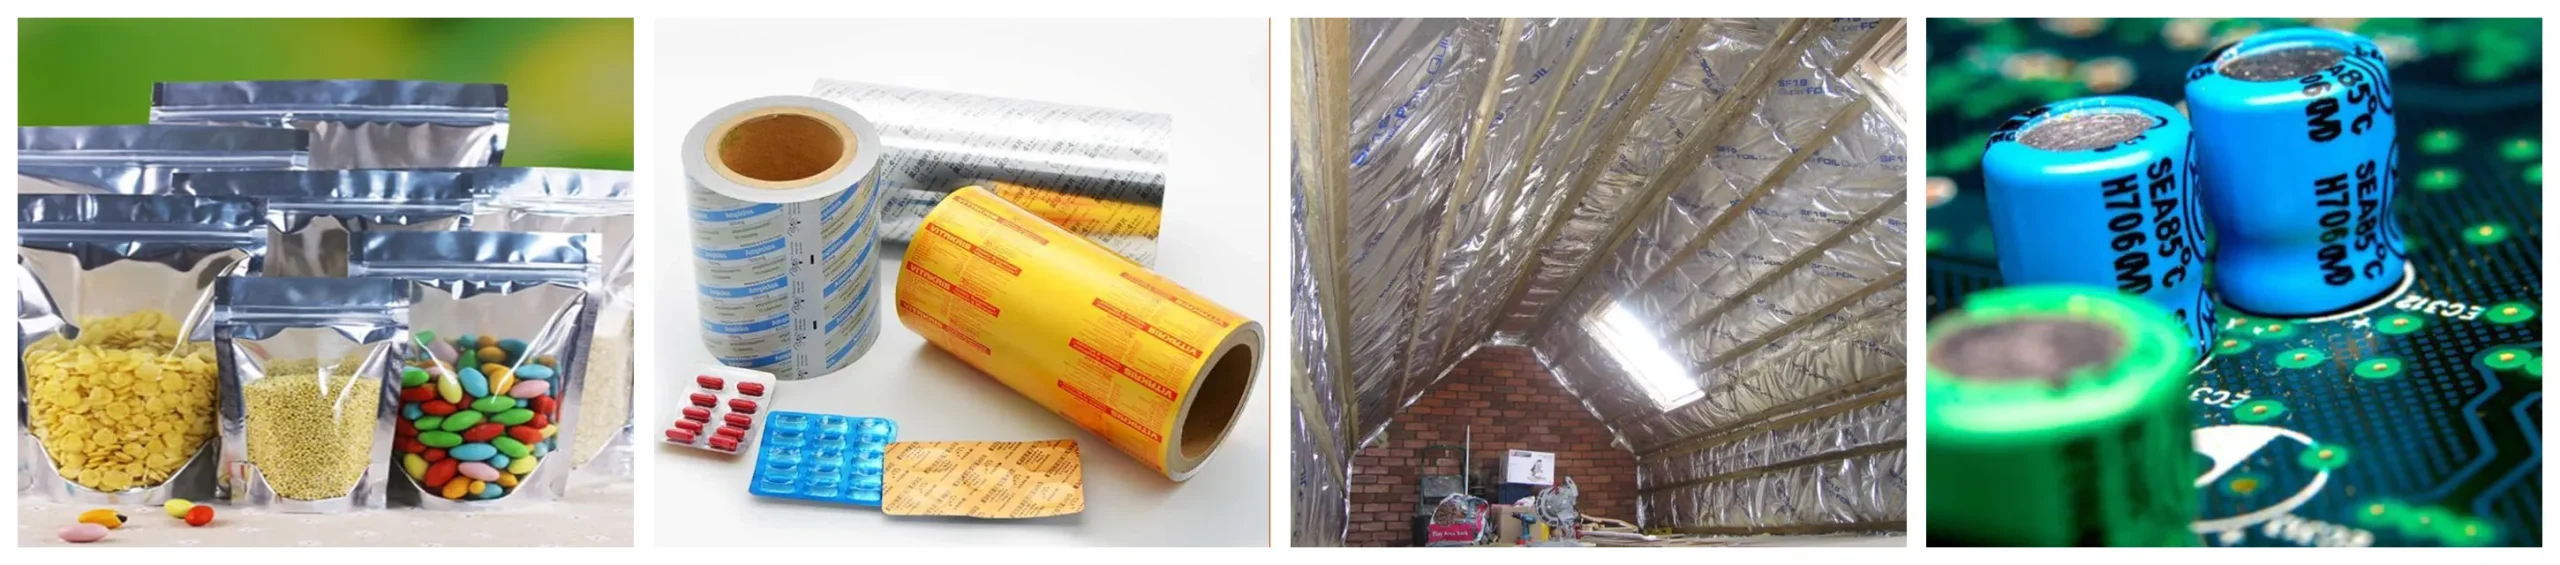 1050 aluminum foil for food and beverage packaging, packaging medications, insulation in roofs, walls, and HVAC systems